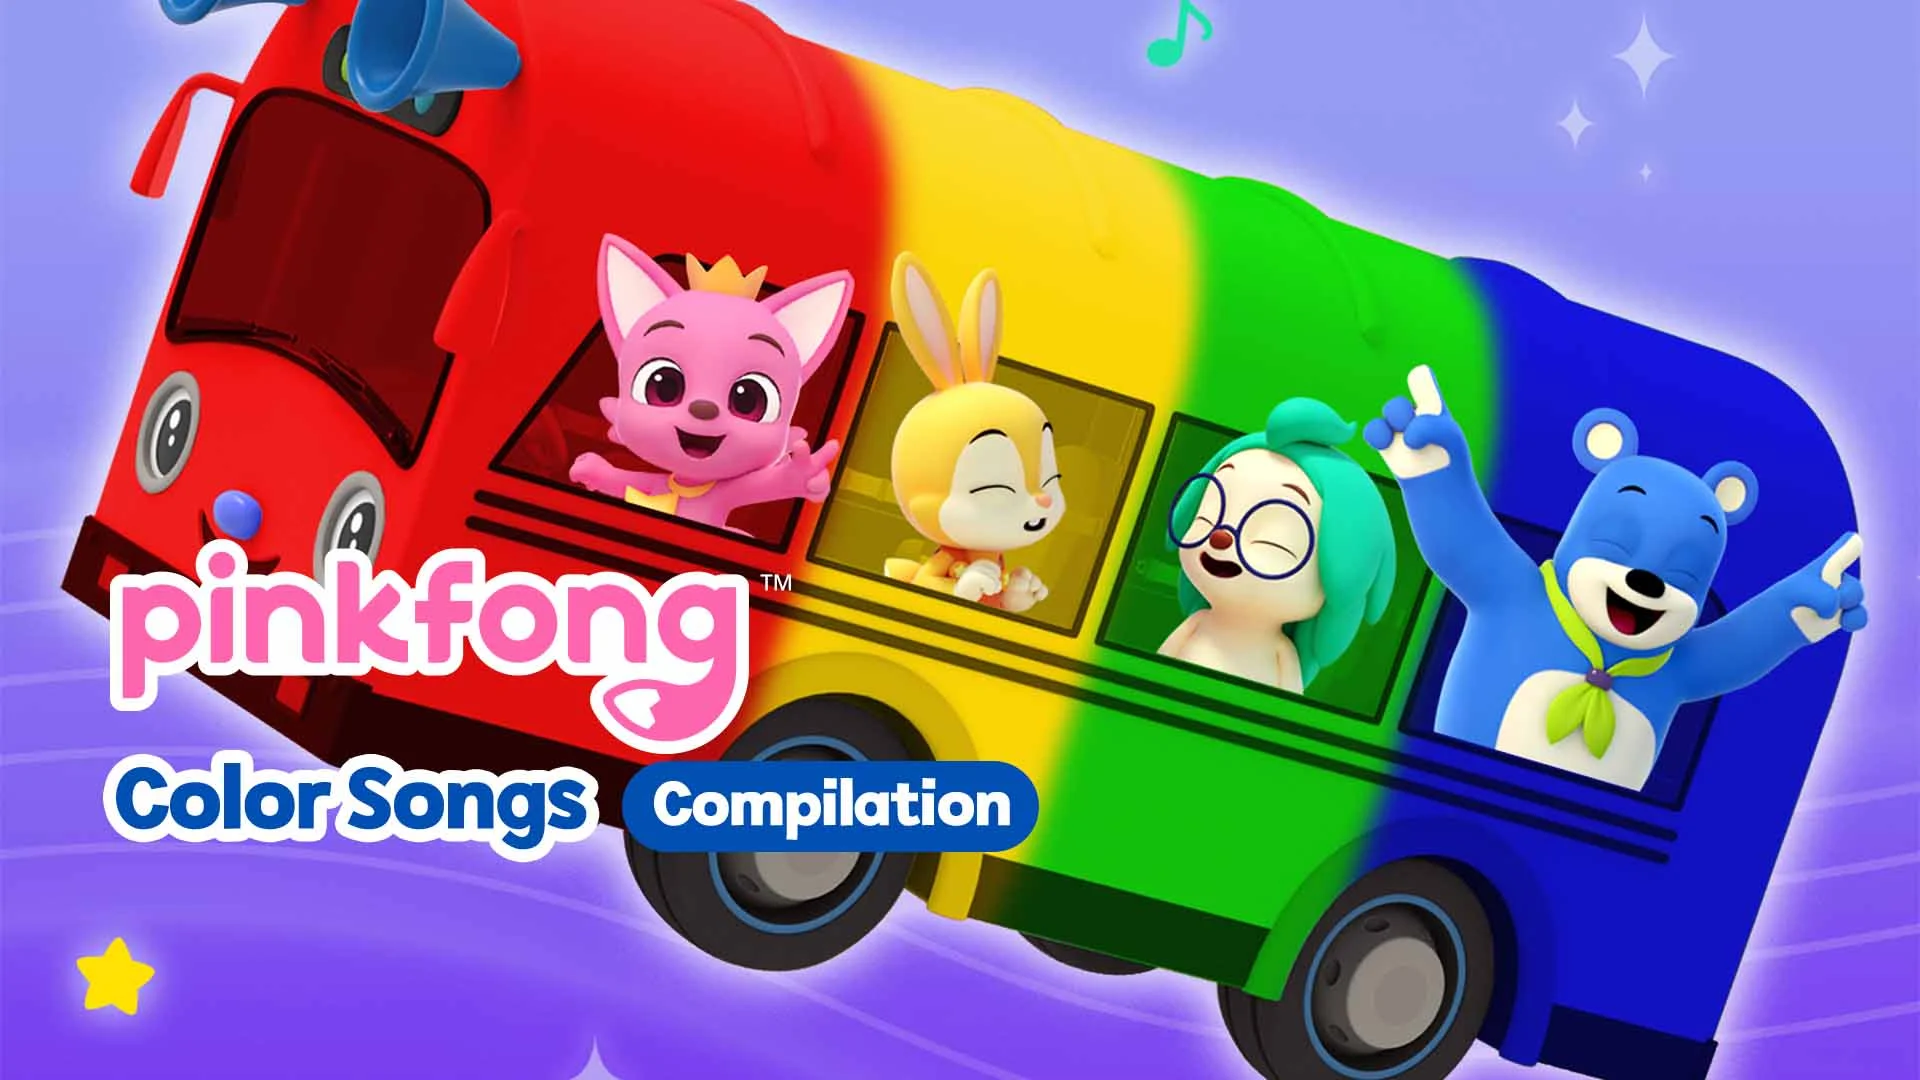 Pinkfong Color Songs Compilation